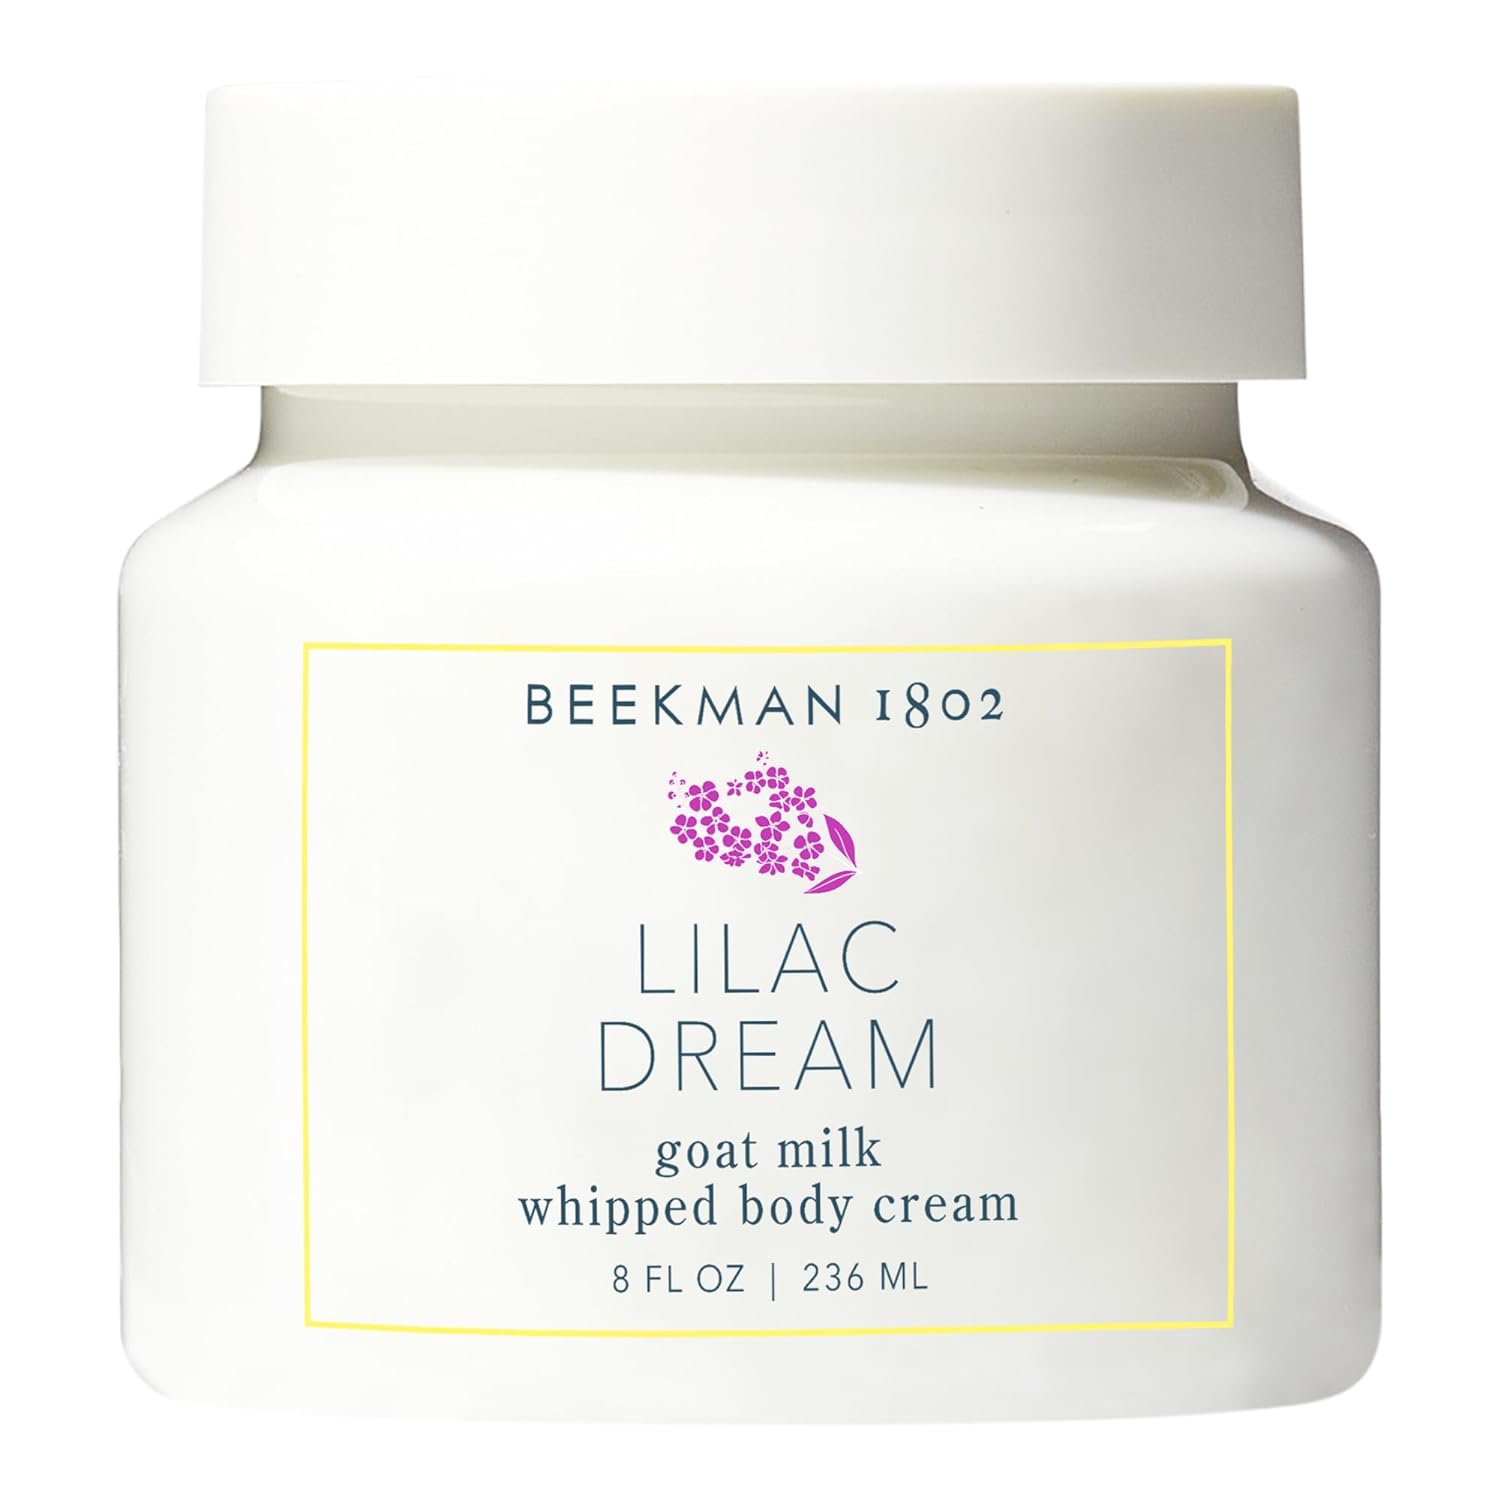 "**Beekman 1802 Whipped Body Cream** - An 8 oz jar of intensely hydrating body cream enriched with goat milk. It softens the skin, making it ideal for sensitive skin. Plus, it's cruelty-free!"